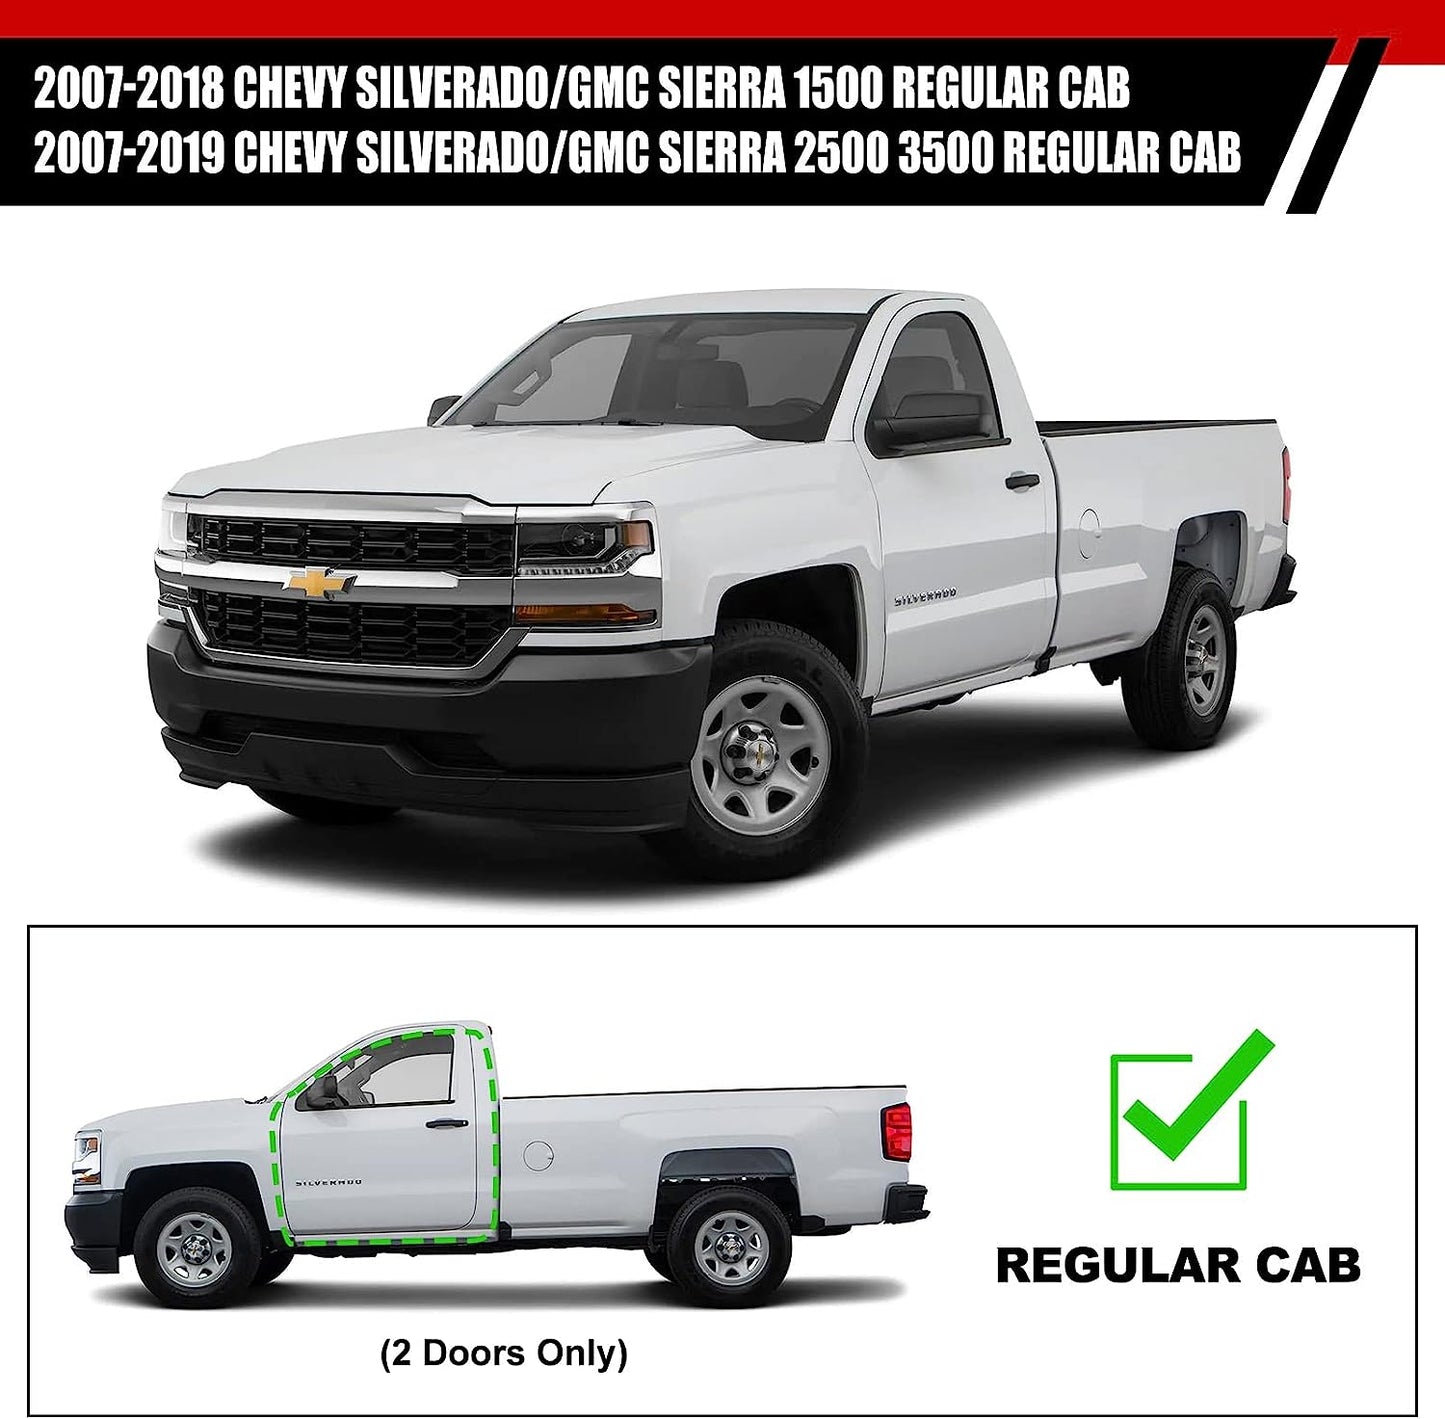 Running Boards Compatible with 2007-2018 Chevy Silverado/Gmc Sierra 1500, 2007-2019 2500HD 3500HD Regular Cab H6 Style. - COMNOVA AUTOPART